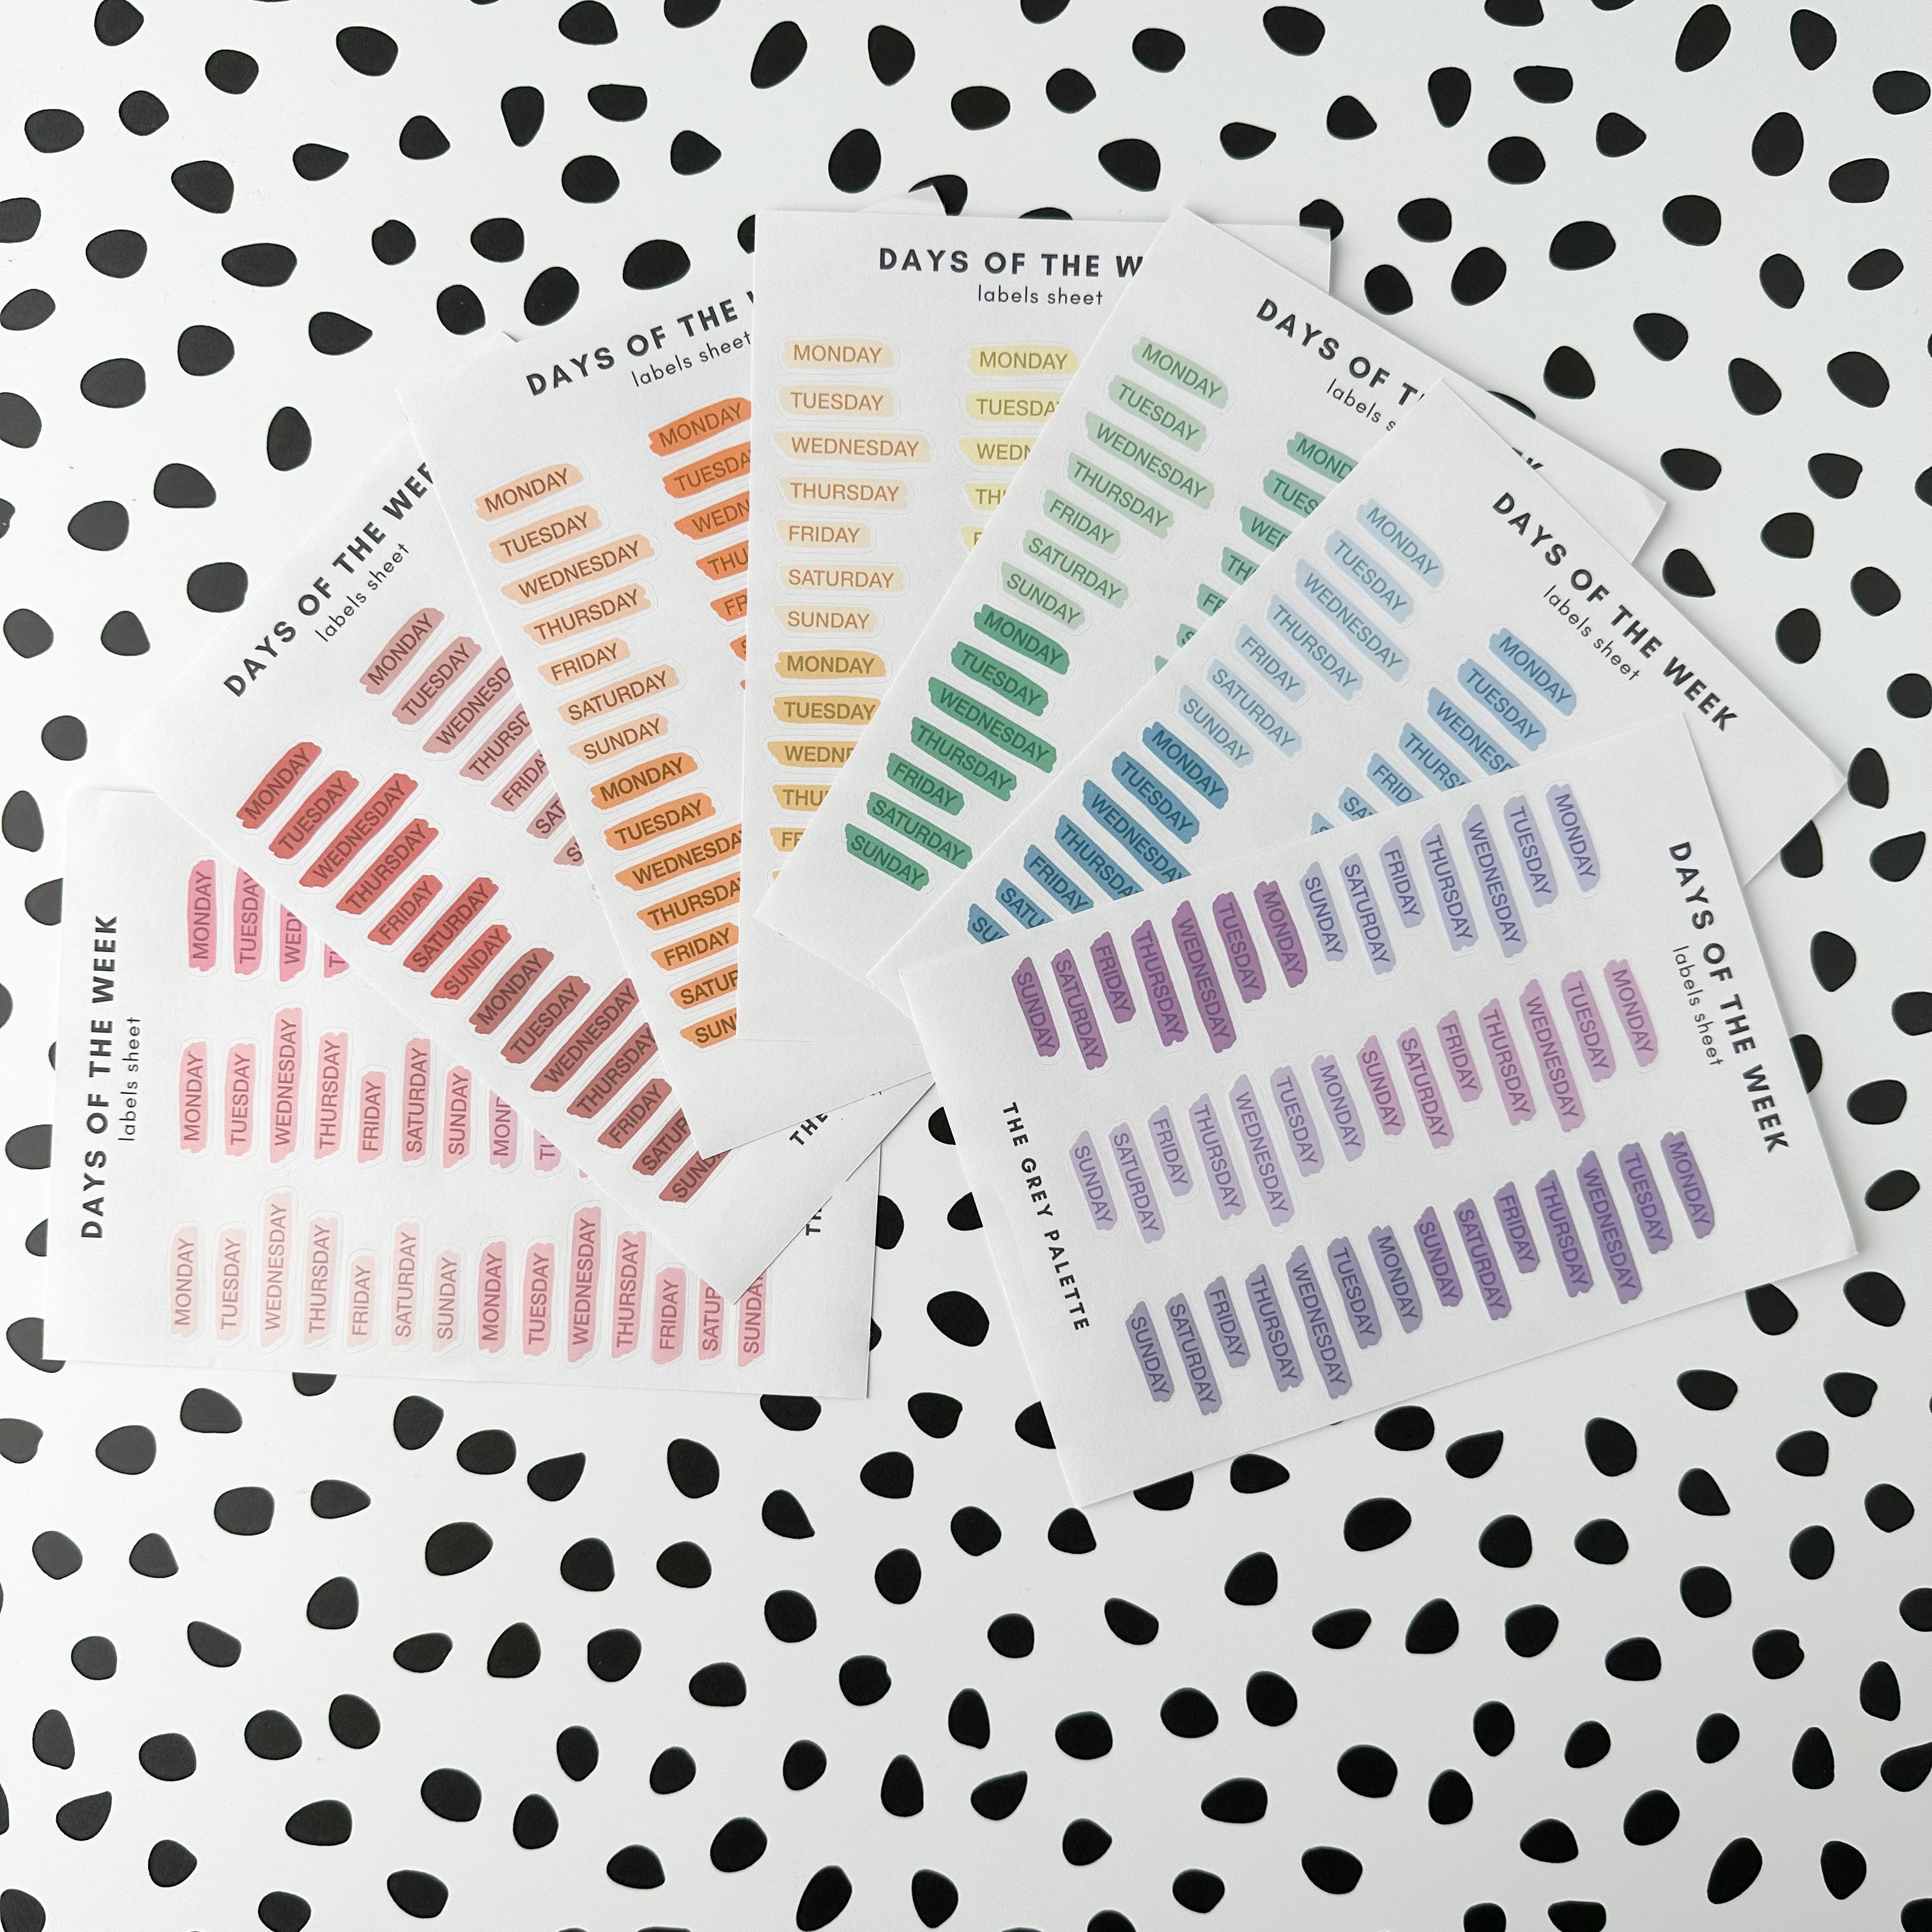 These watercolor style days of the week stickers are perfect for adding a pop of color to your planner, calendar or to do list. These stickers are rom A grey palette and sold at BBB Supplies Craft Shop.